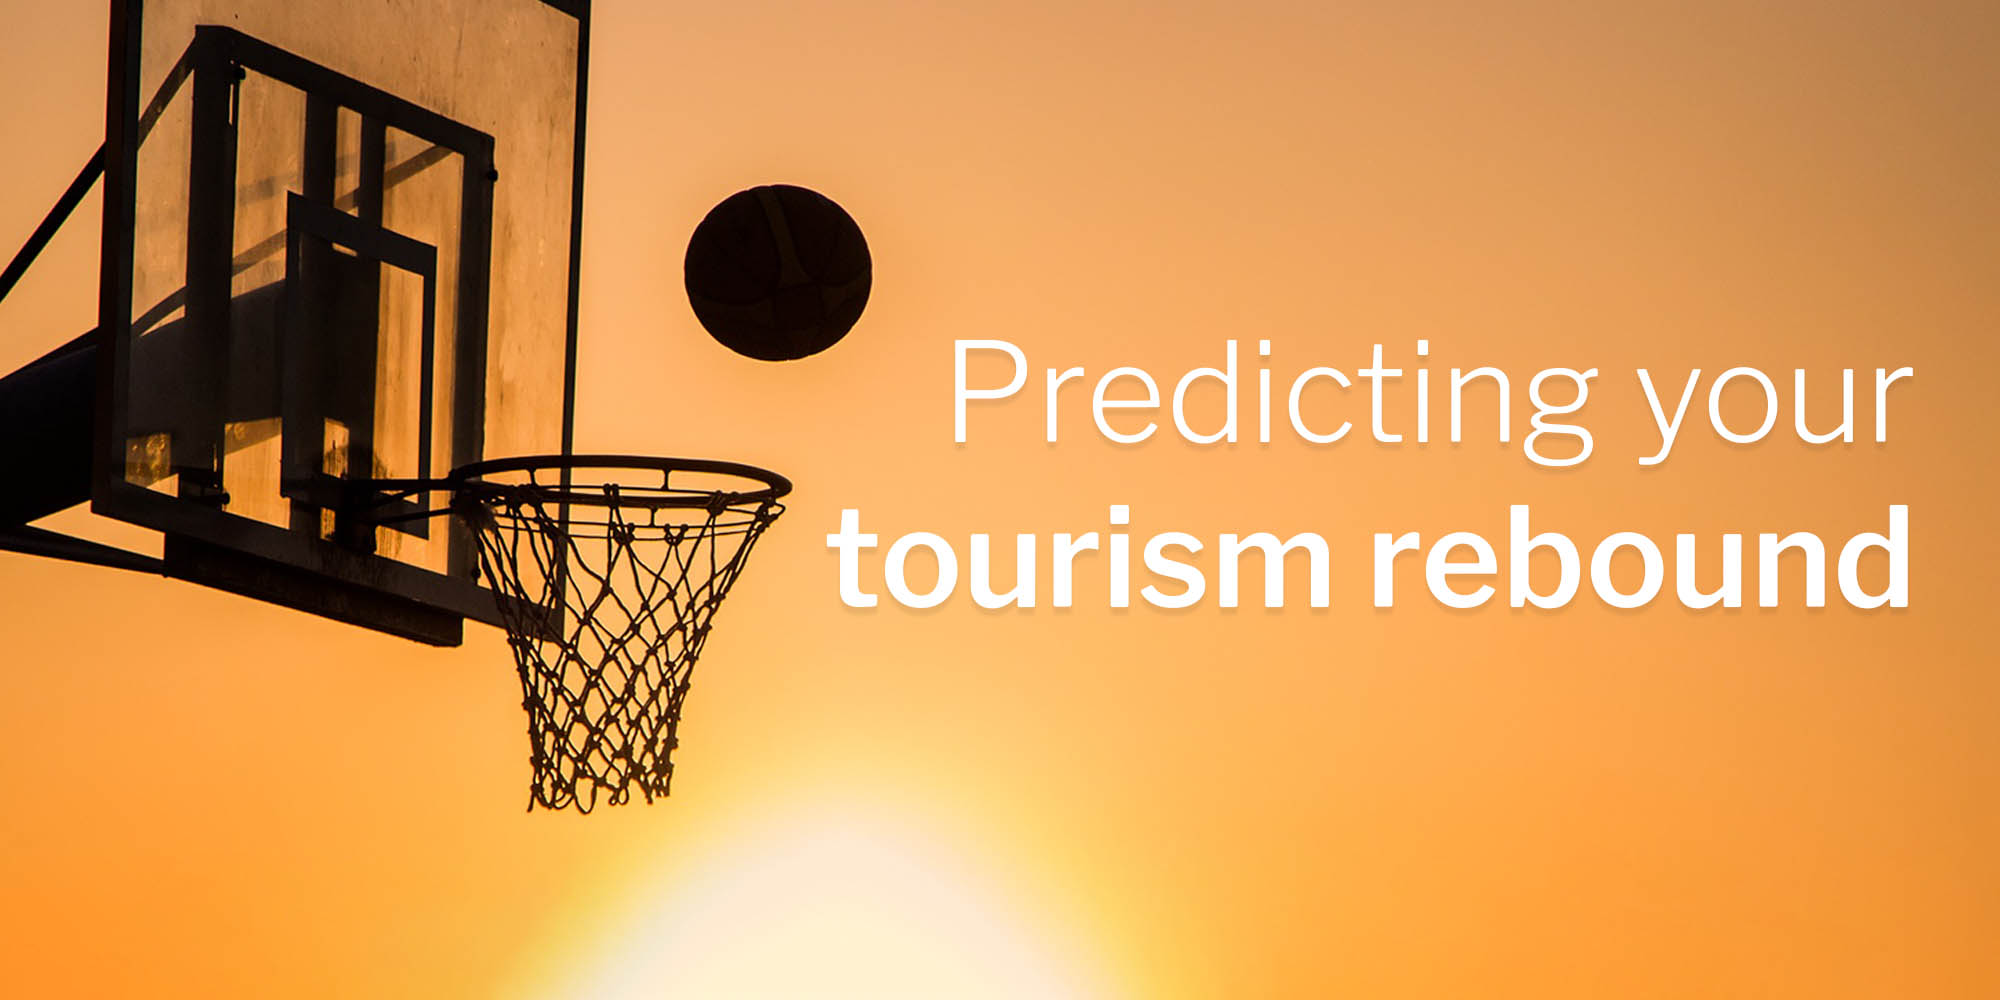 How to predict the tourism rebound